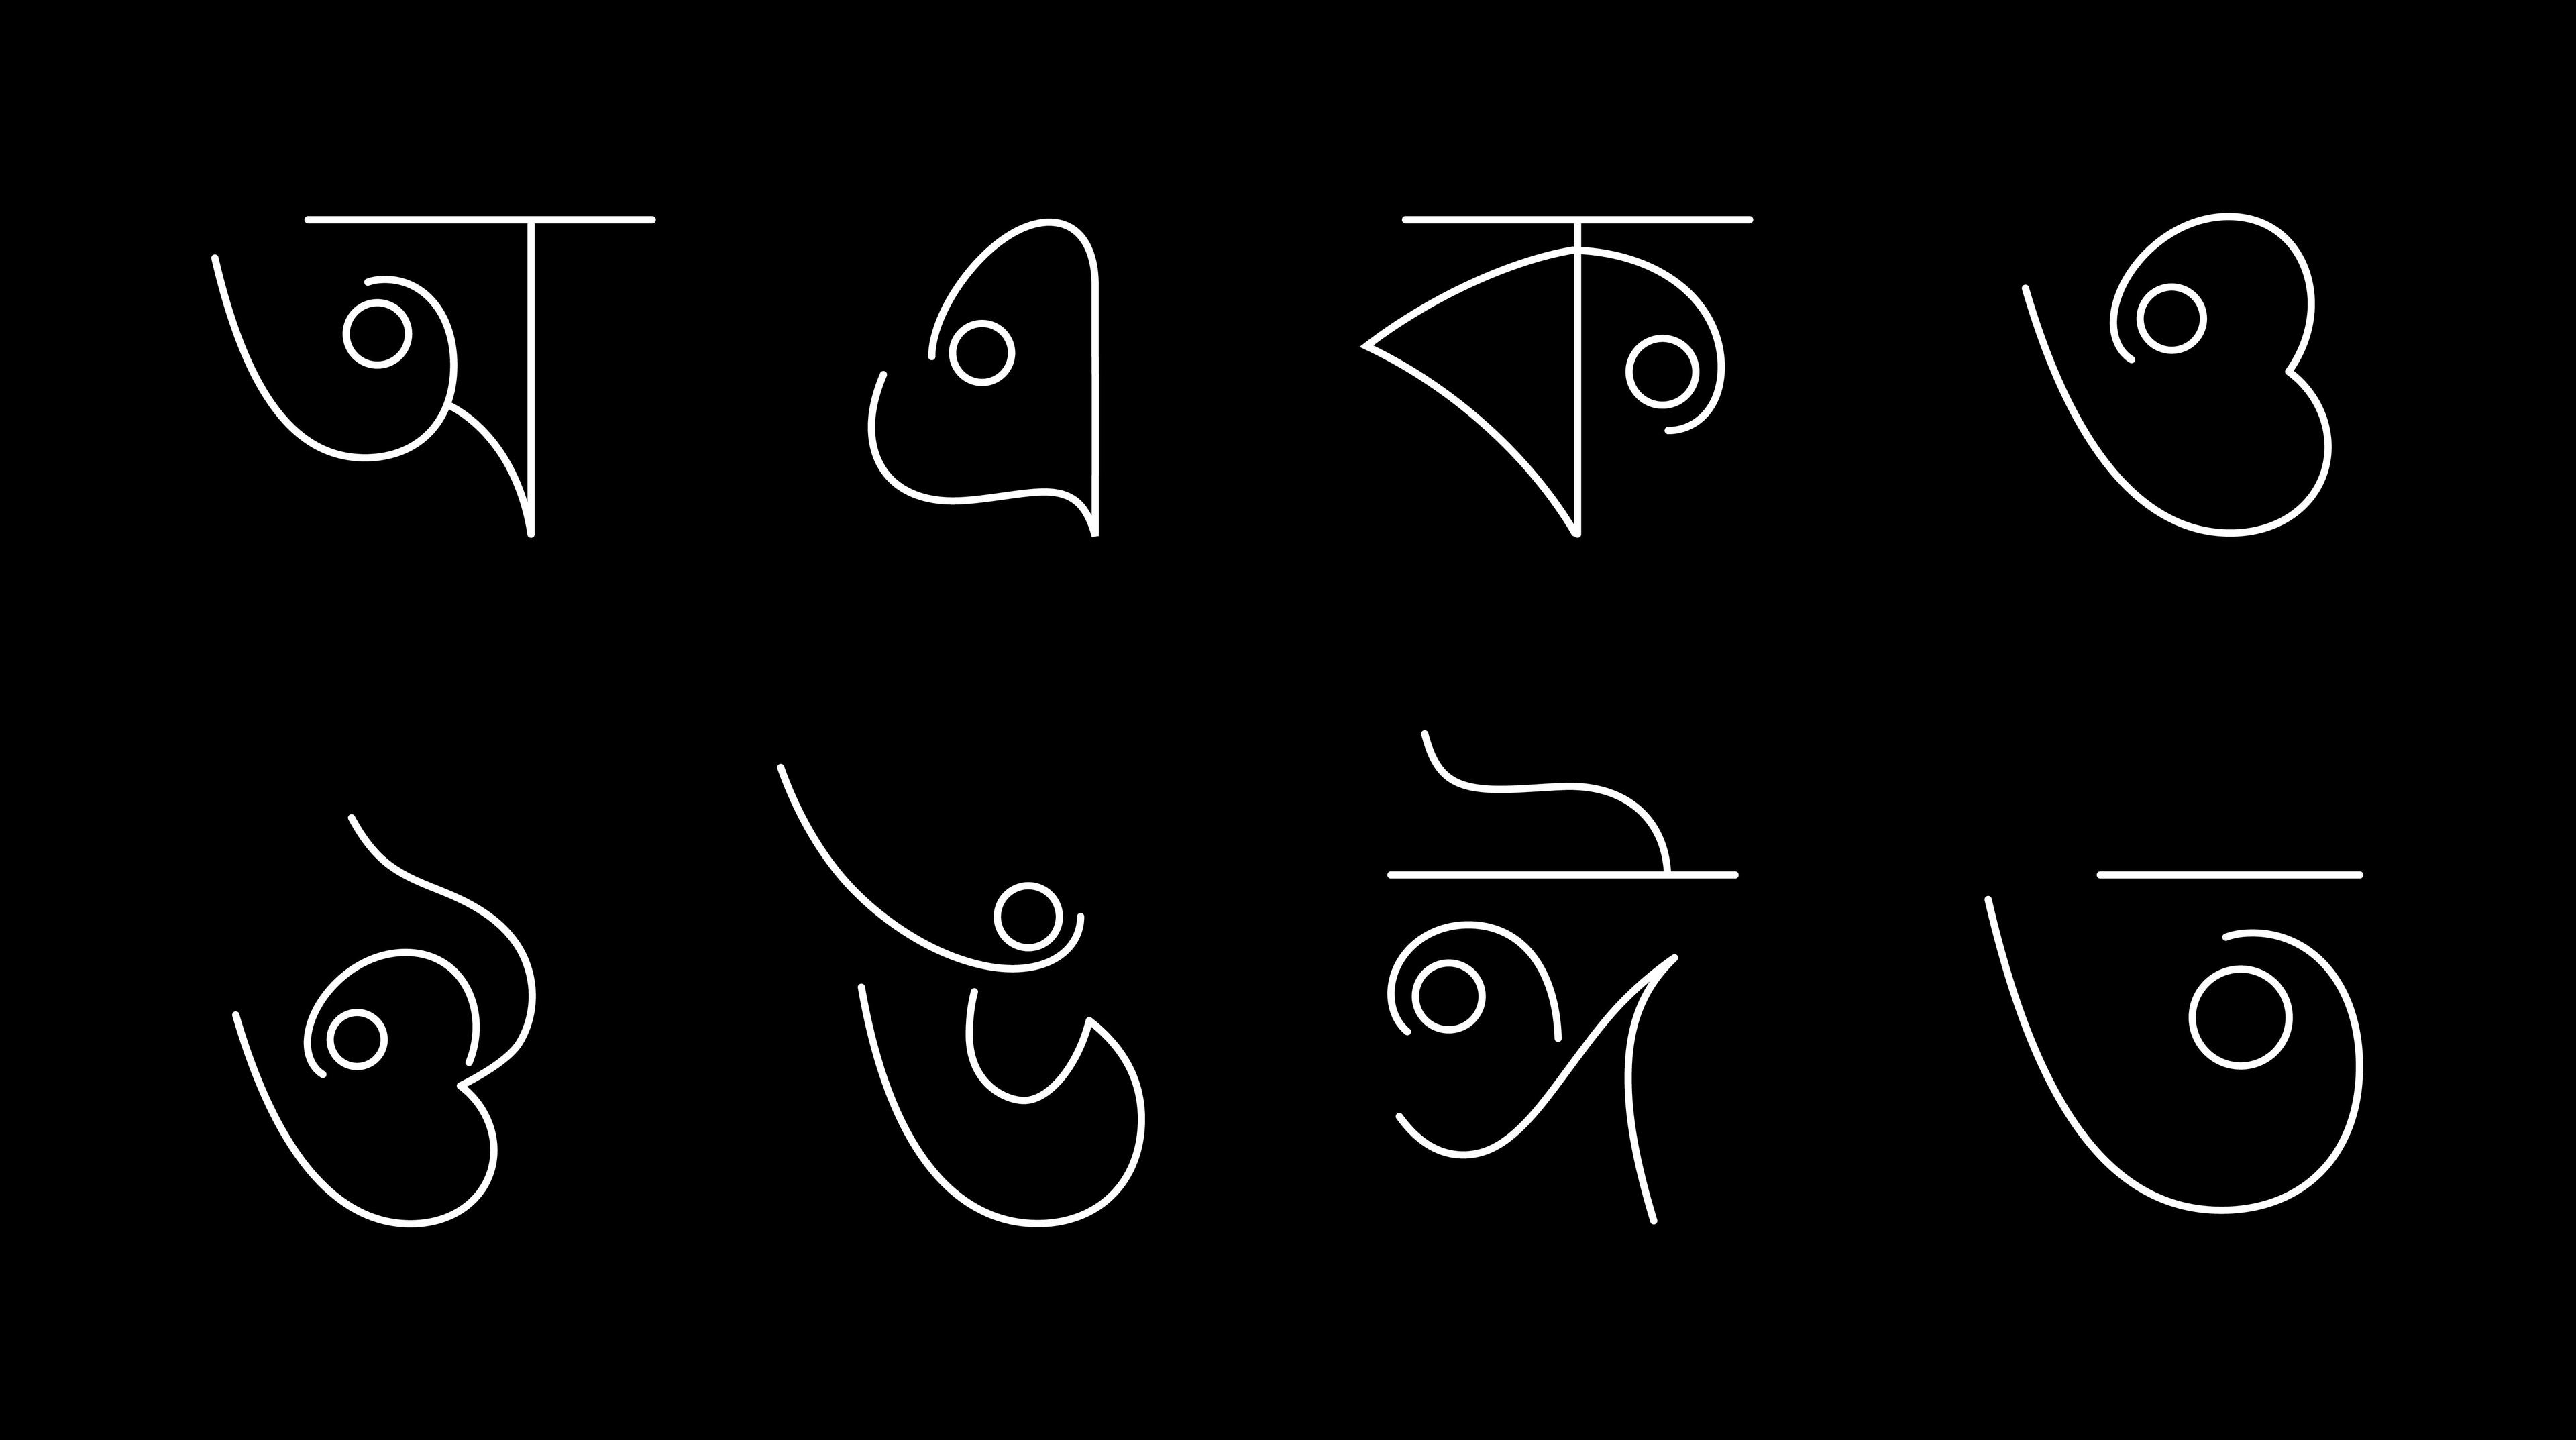 Different redesigns of Bengali alphabets used in the website